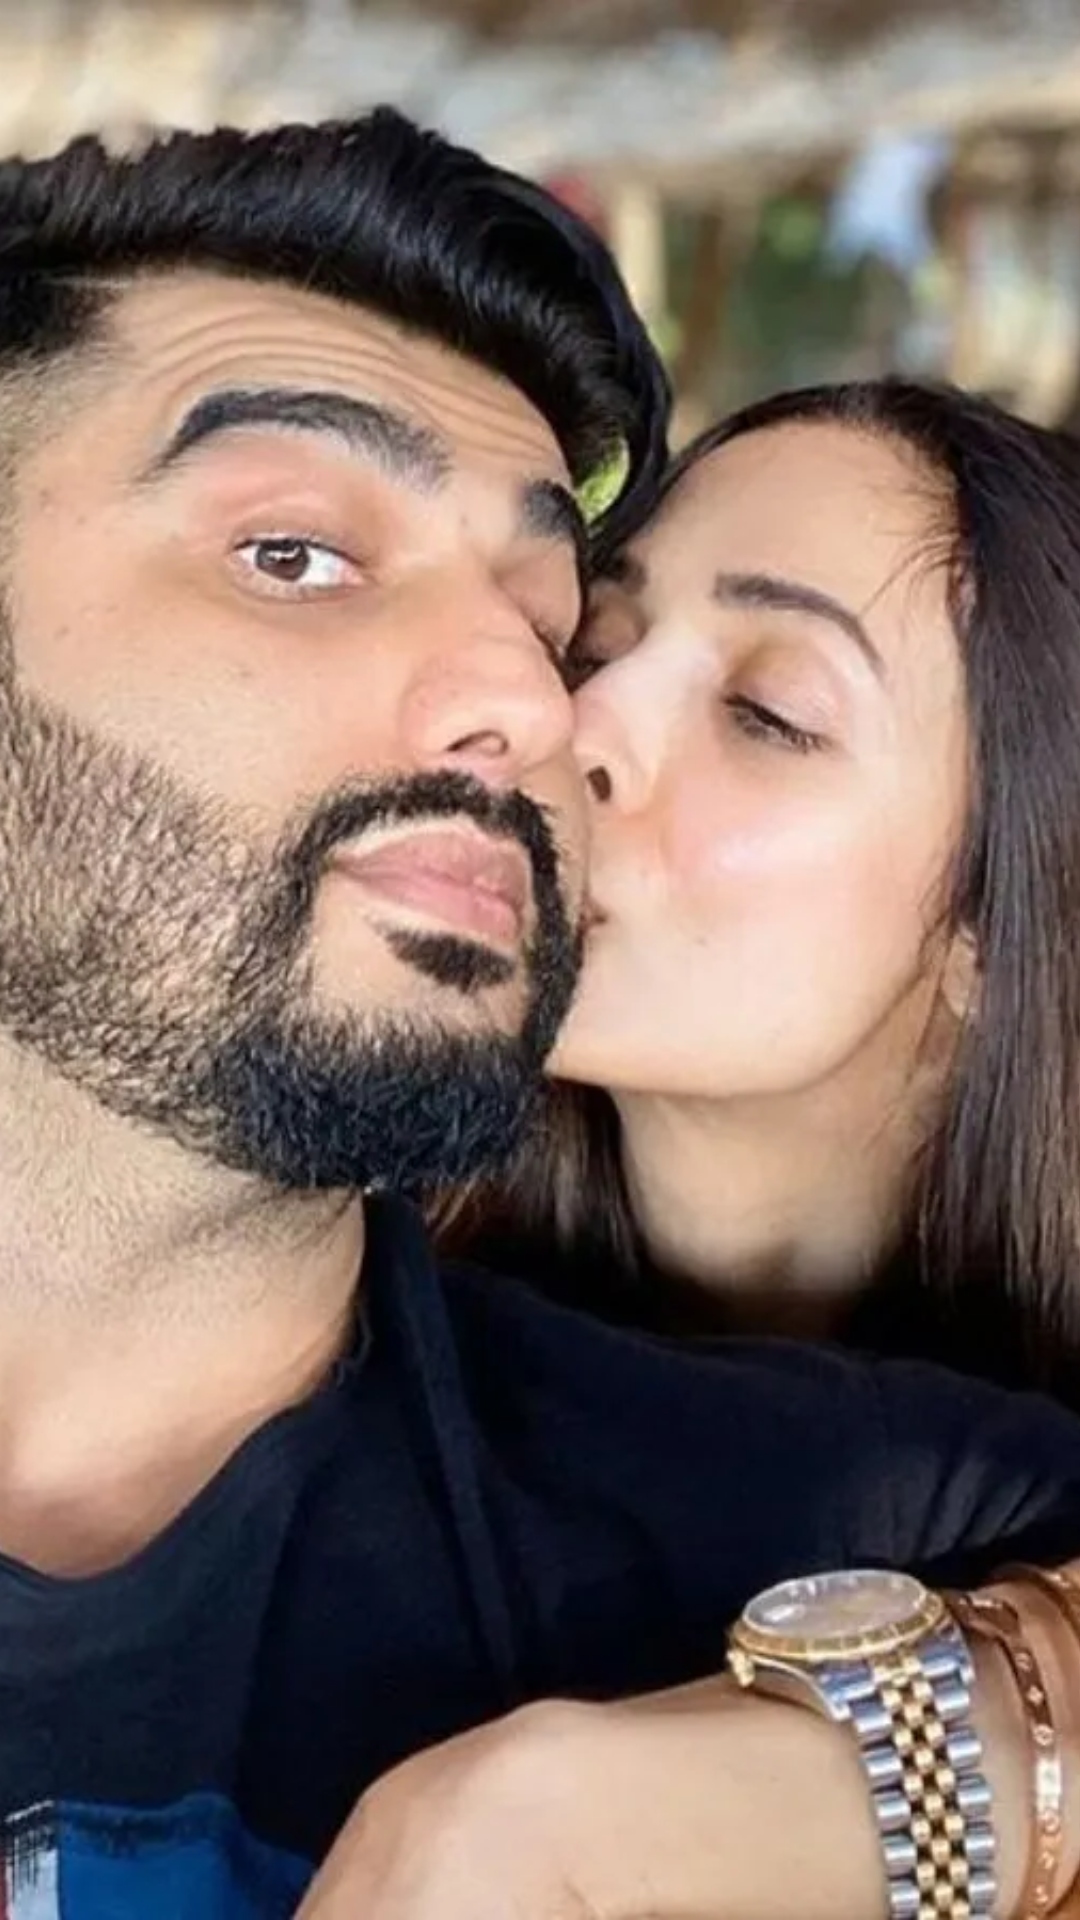 Times when Arjun Kapoor and Malaika Arora gave relationship goals with cute photos